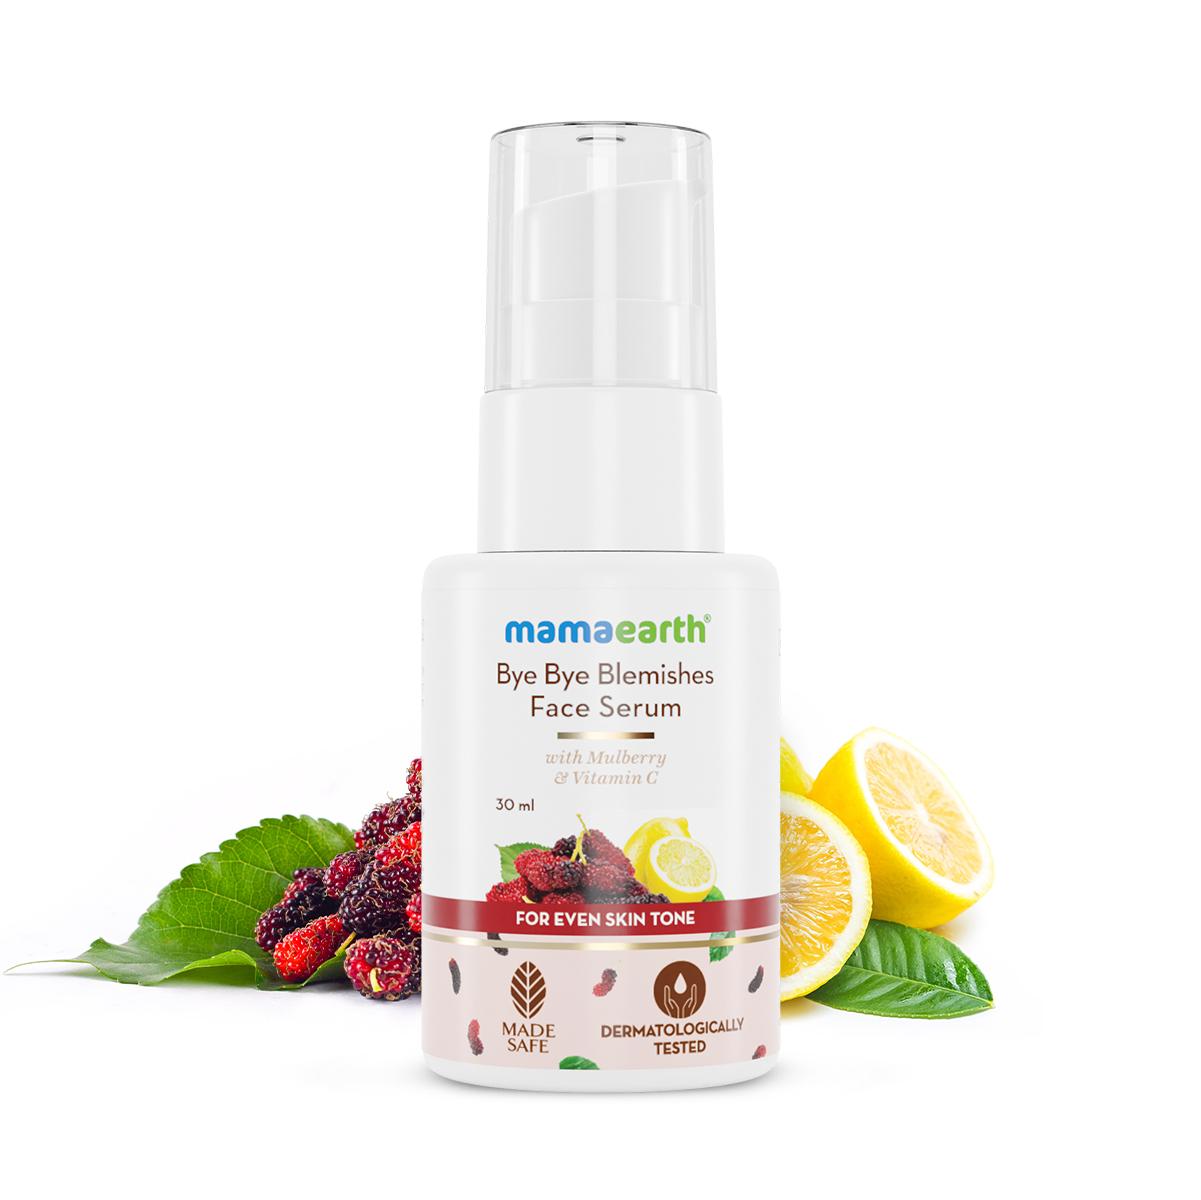 bye bye blemishes face serum with mulberry and vitamin c for even skin tone - 30ml